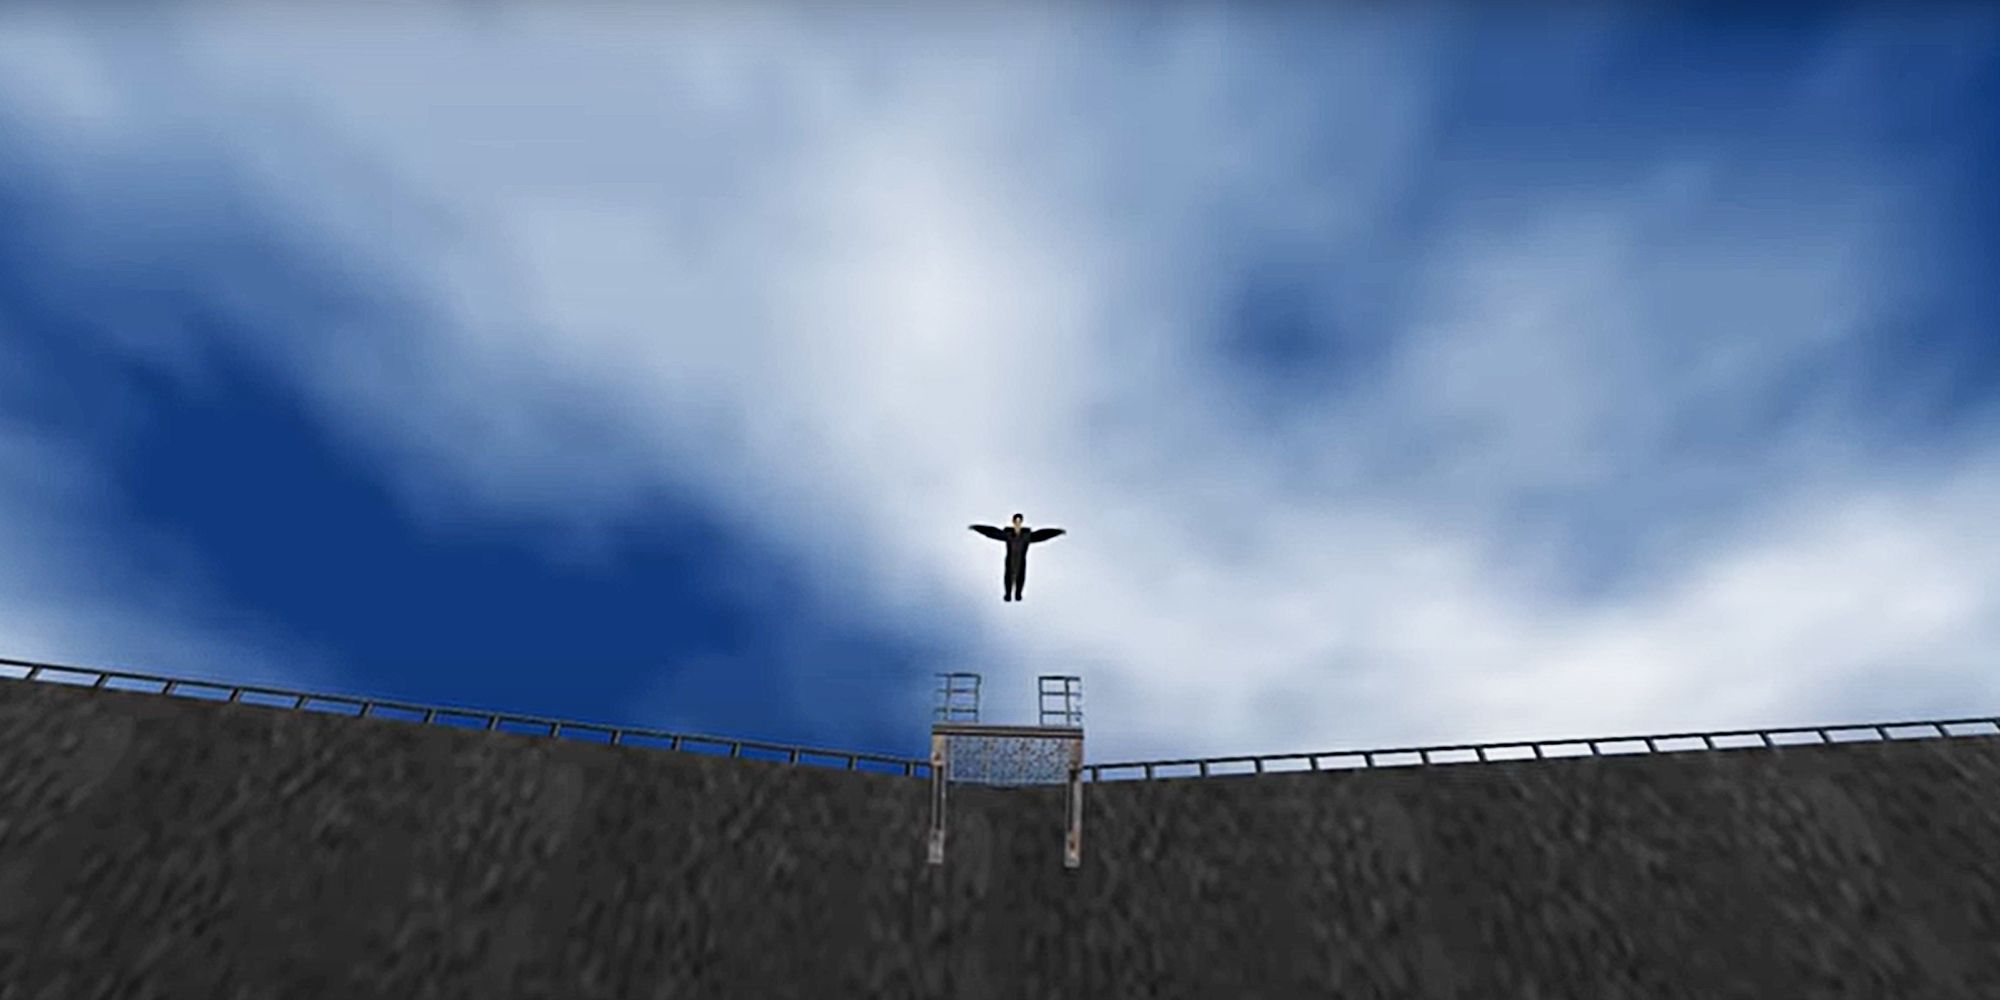 Leaping From The Dam Goldeneye 007